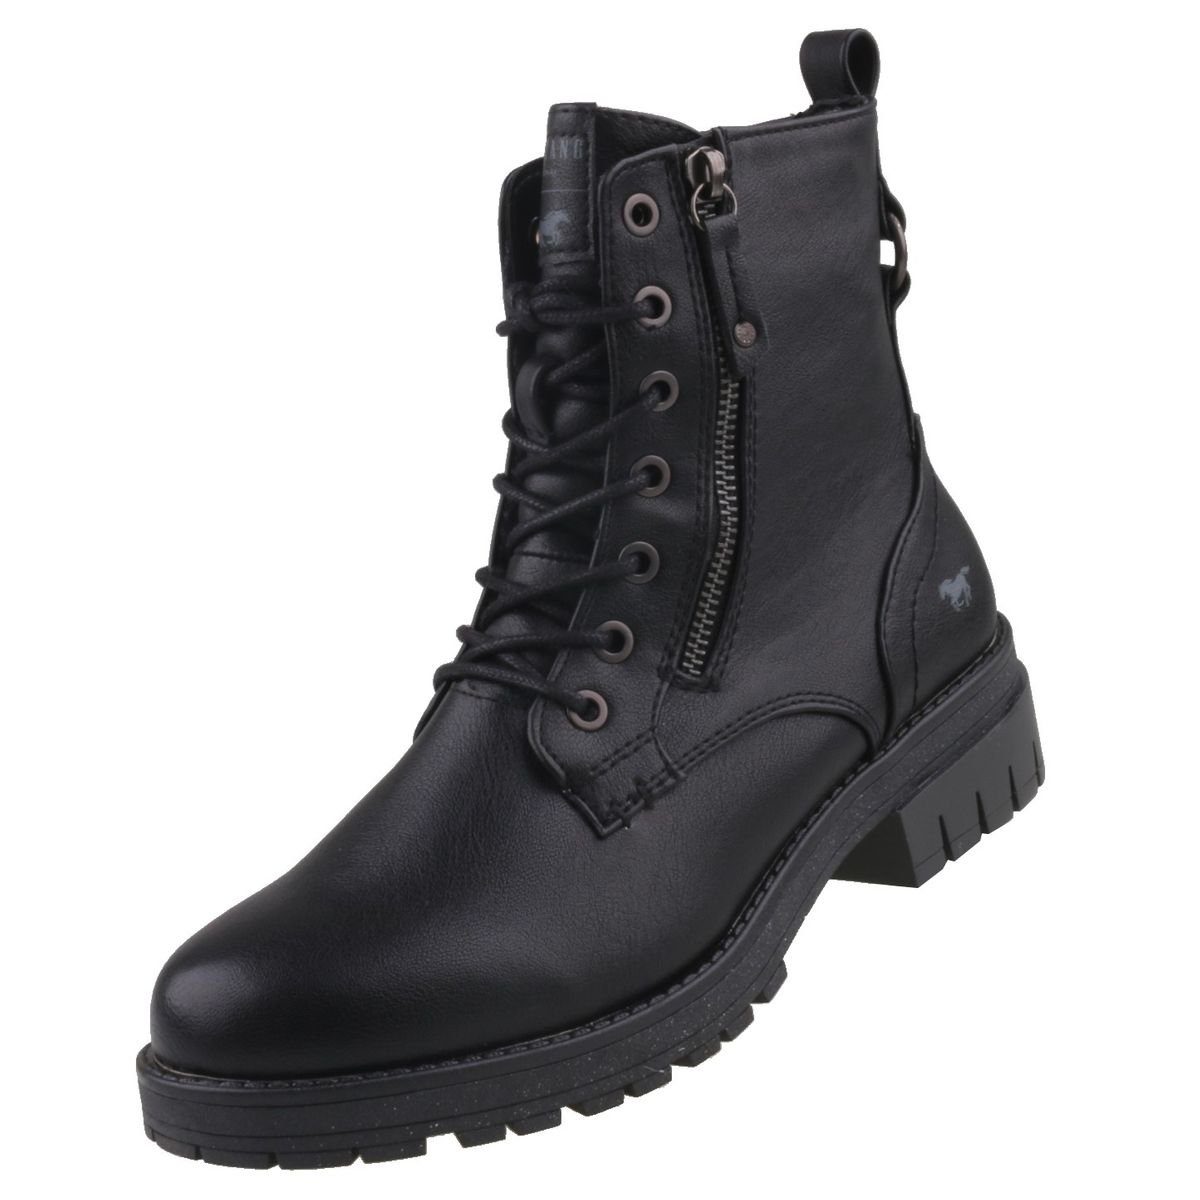 Mustang Shoes 1397603/9 Stiefelette